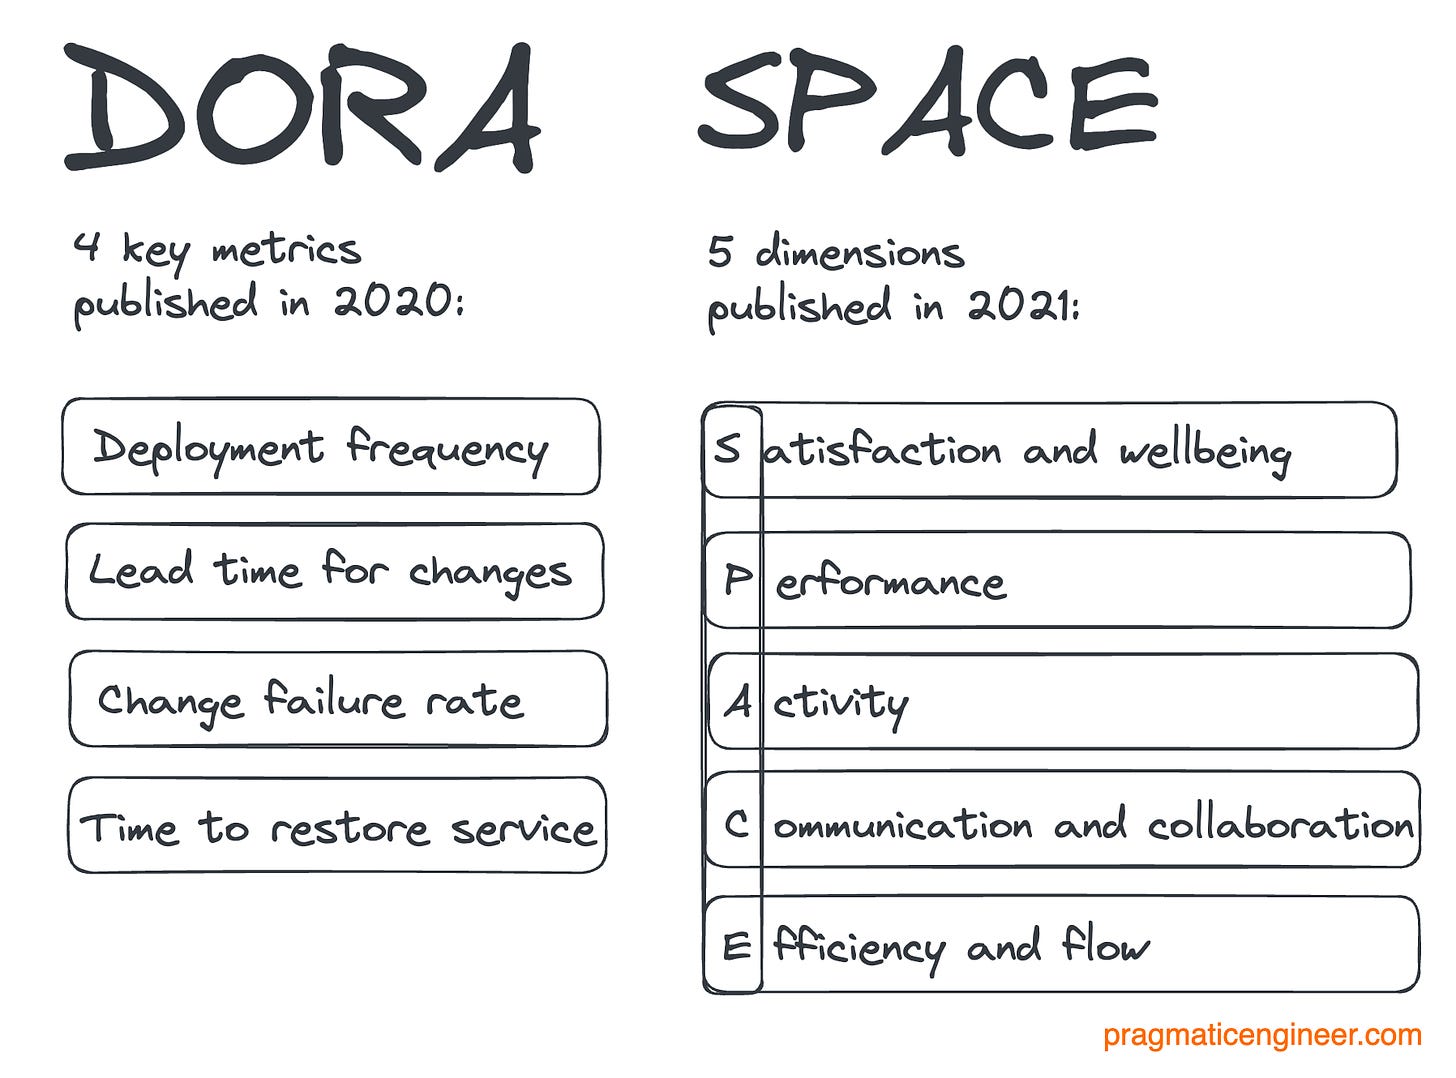 The DORA and SPACE frameworks